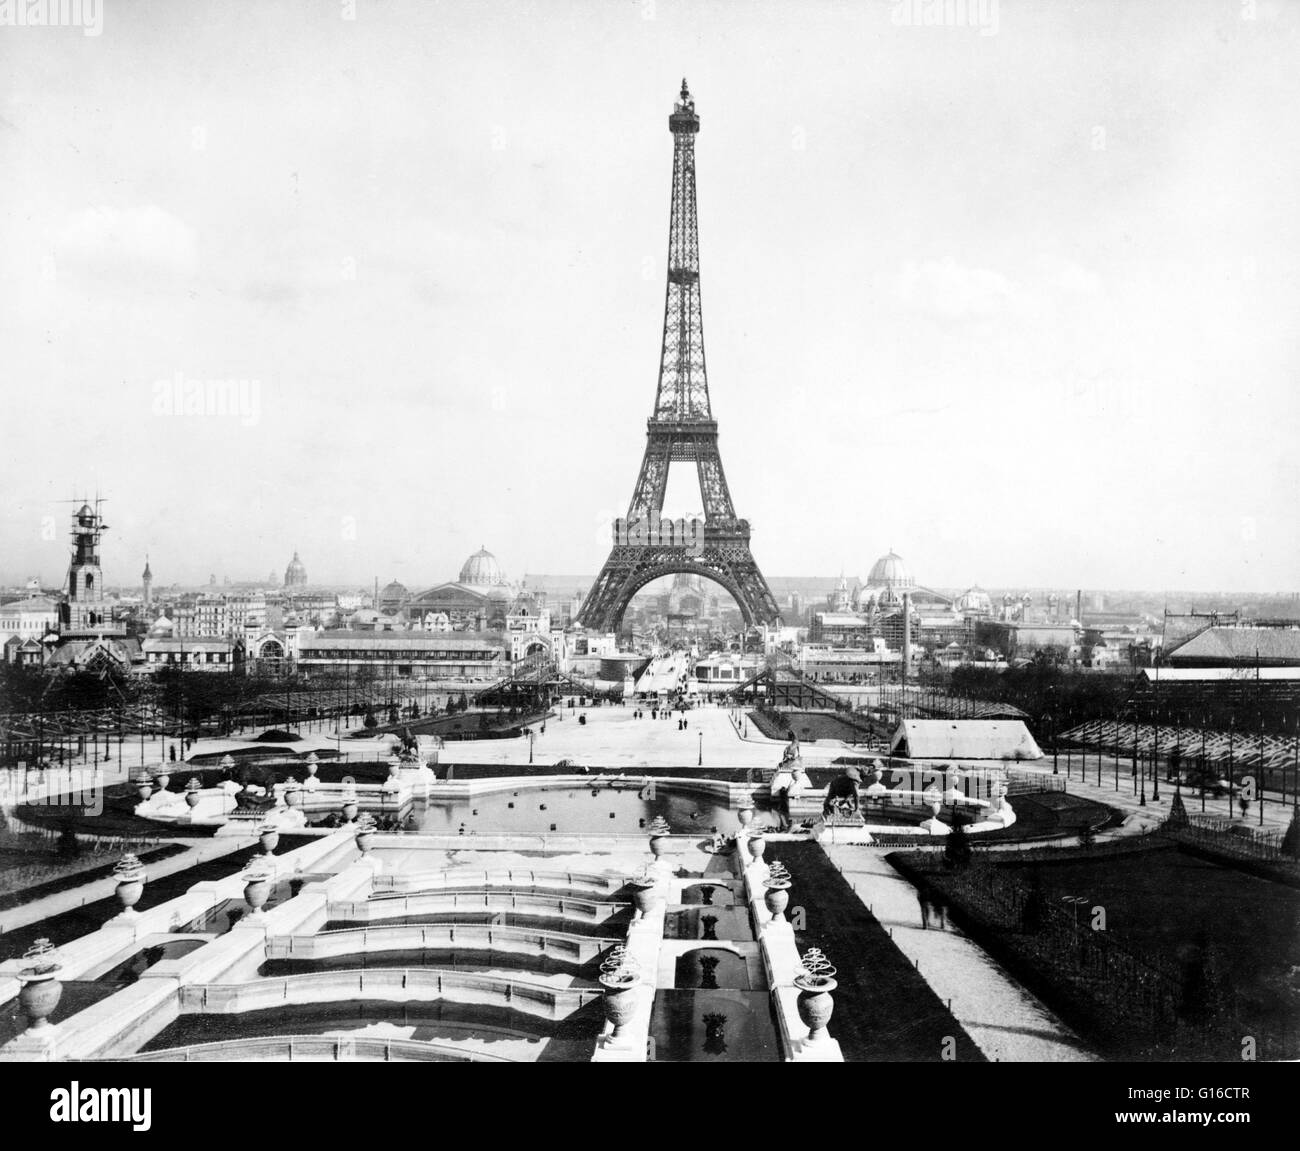 Eiffel Tower and exposition buildings on the Champ de Mars as seen from the Trocadéro Palace, Paris Exposition, 1889. The Eiffel Tower (La Tour Eiffel) is an iron lattice tower located on the Champ de Mars in Paris. It was named after the engineer Gustave Stock Photo